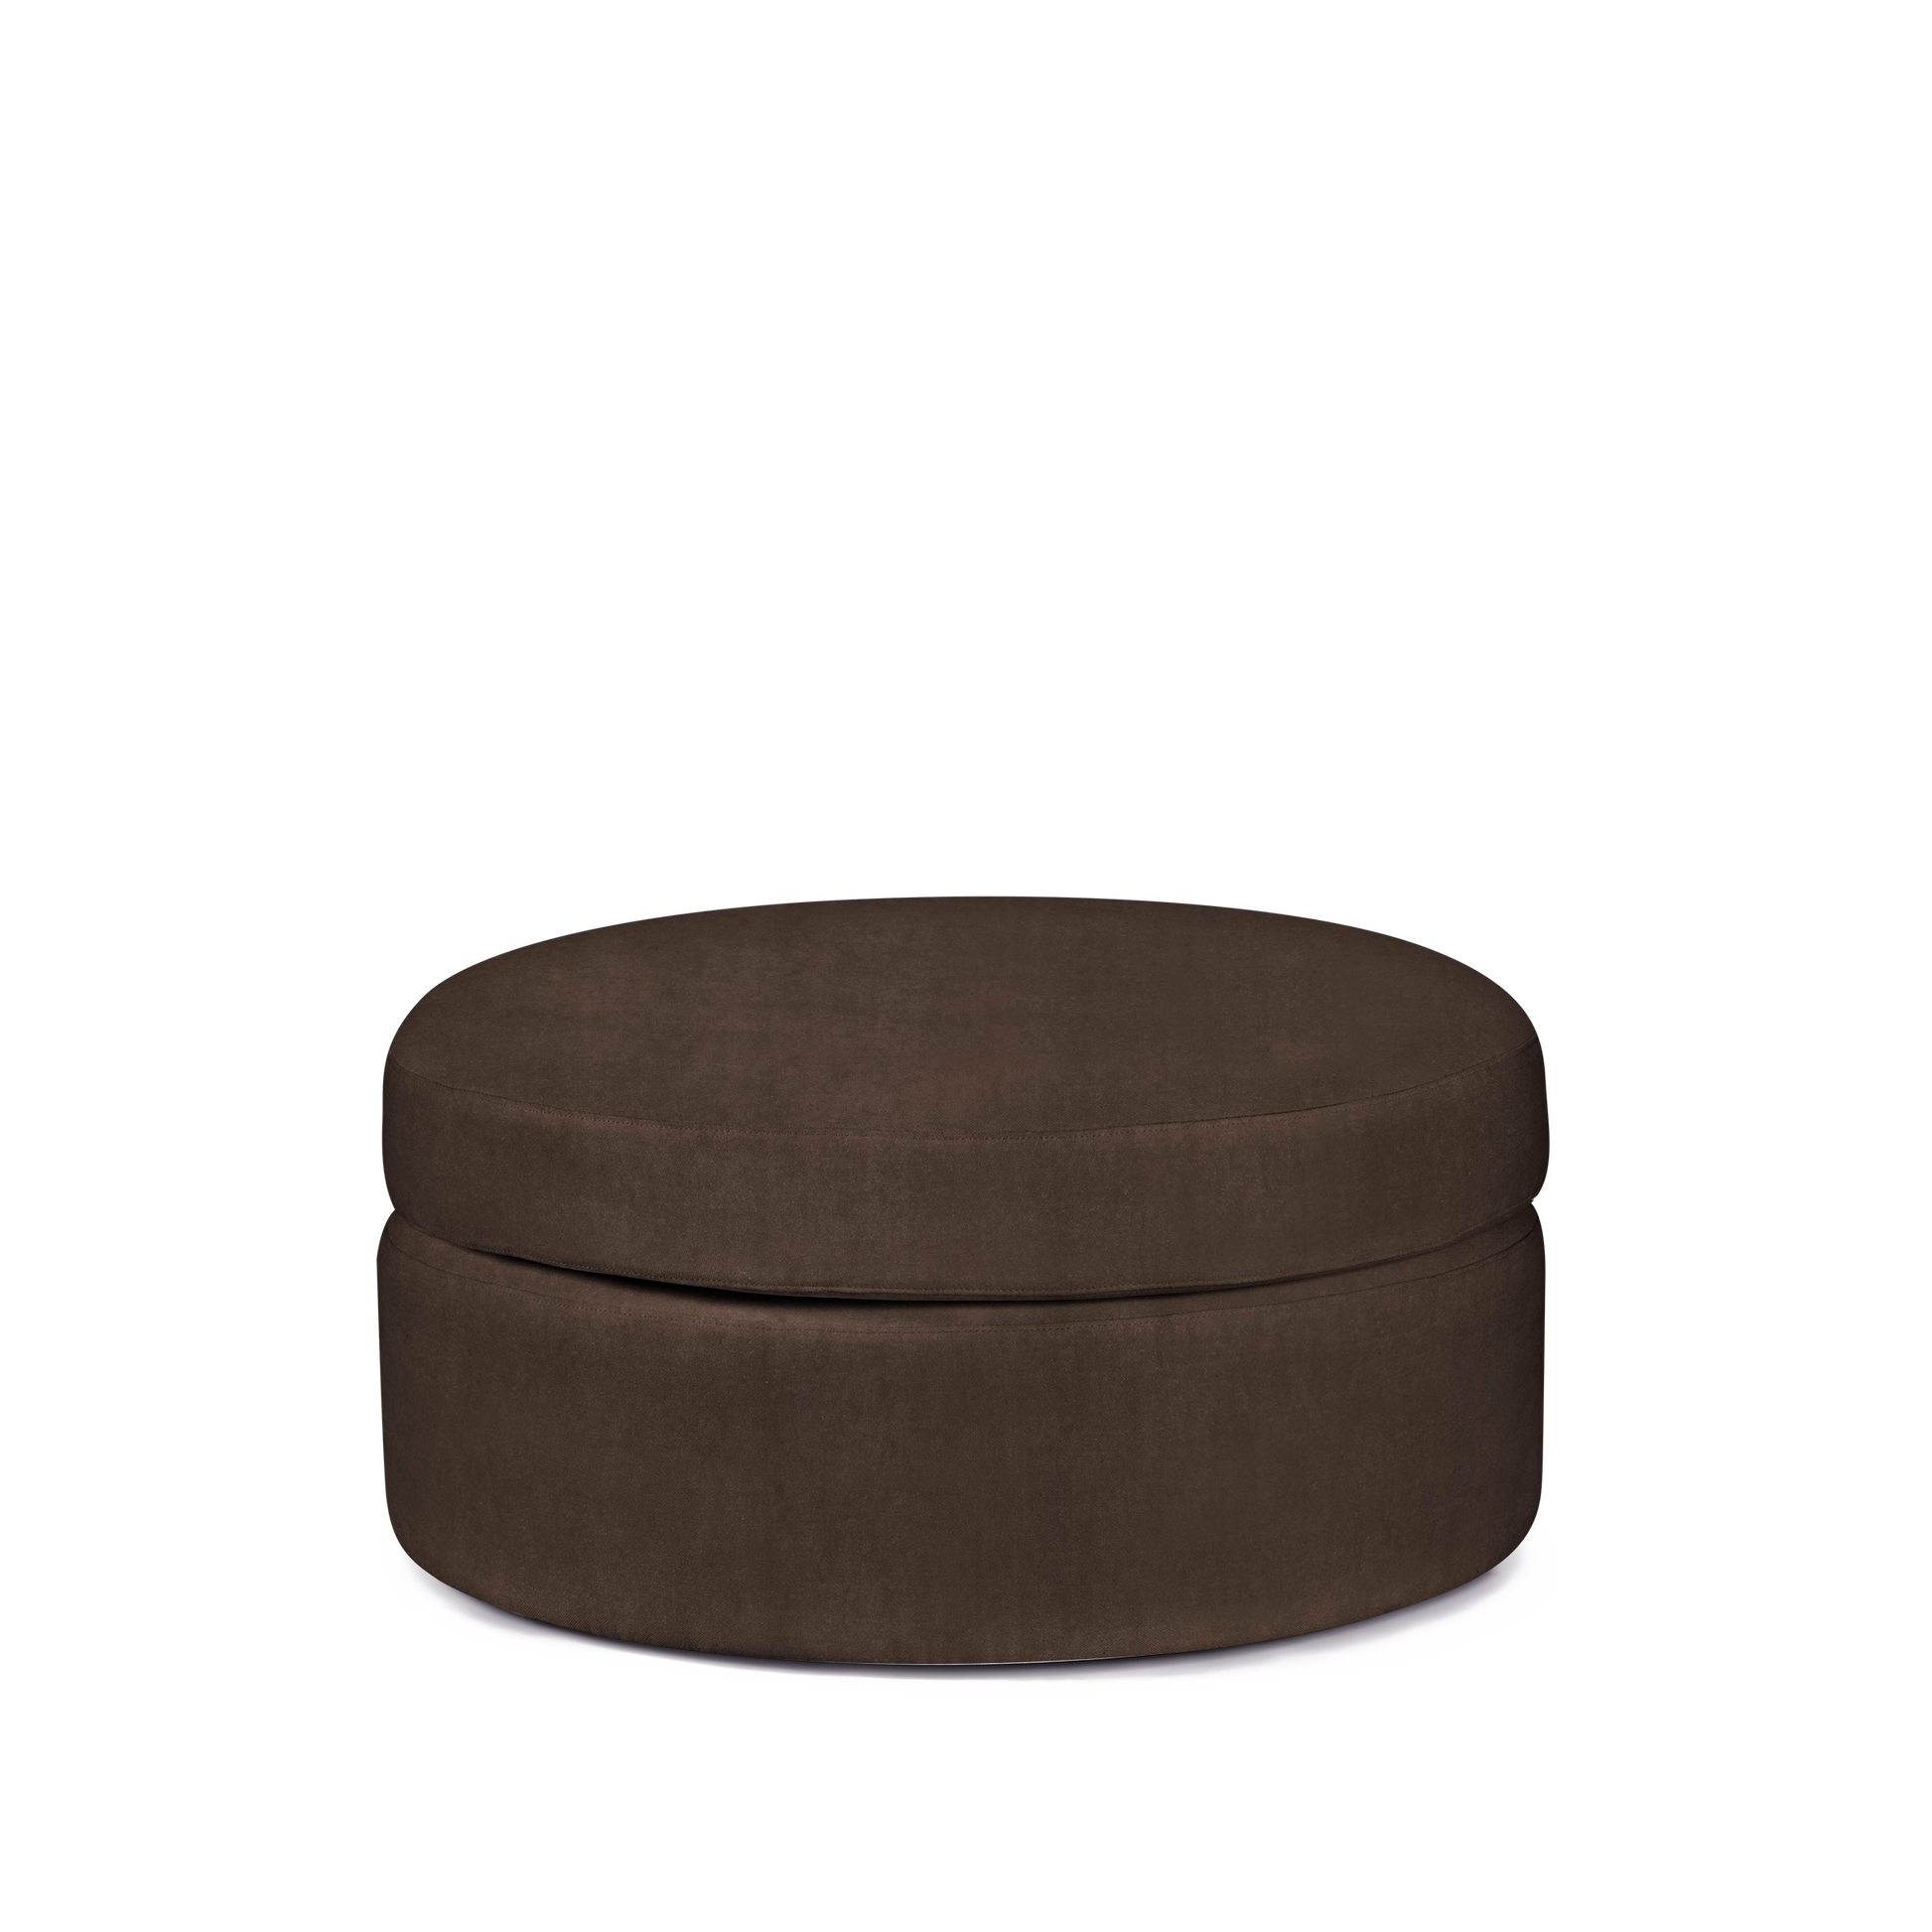 Alma ottoman with suede brown textile